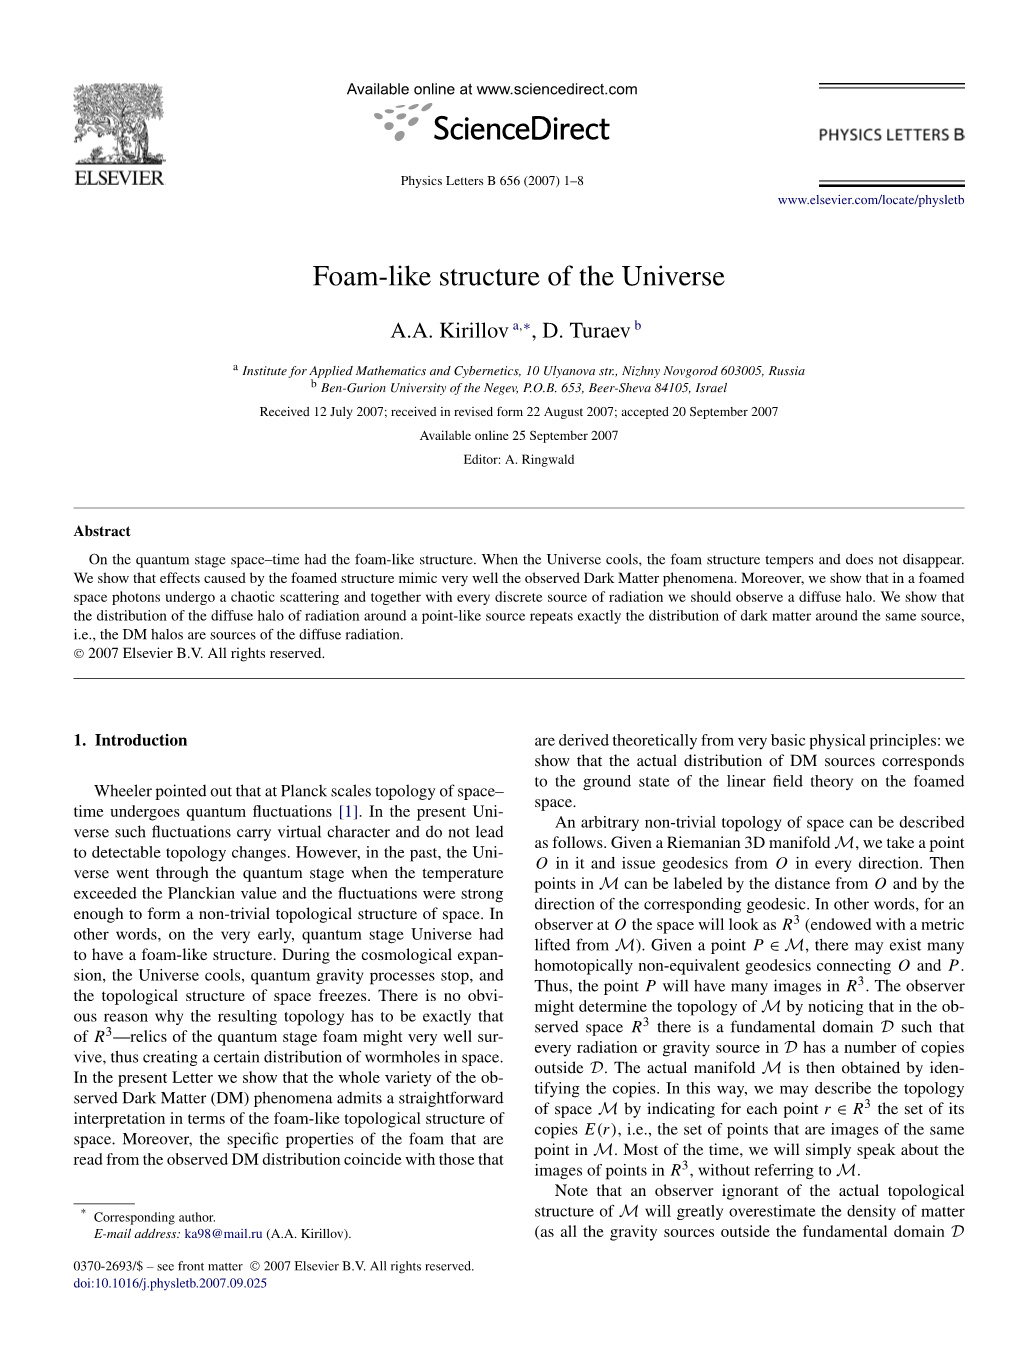 Foam-Like Structure of the Universe